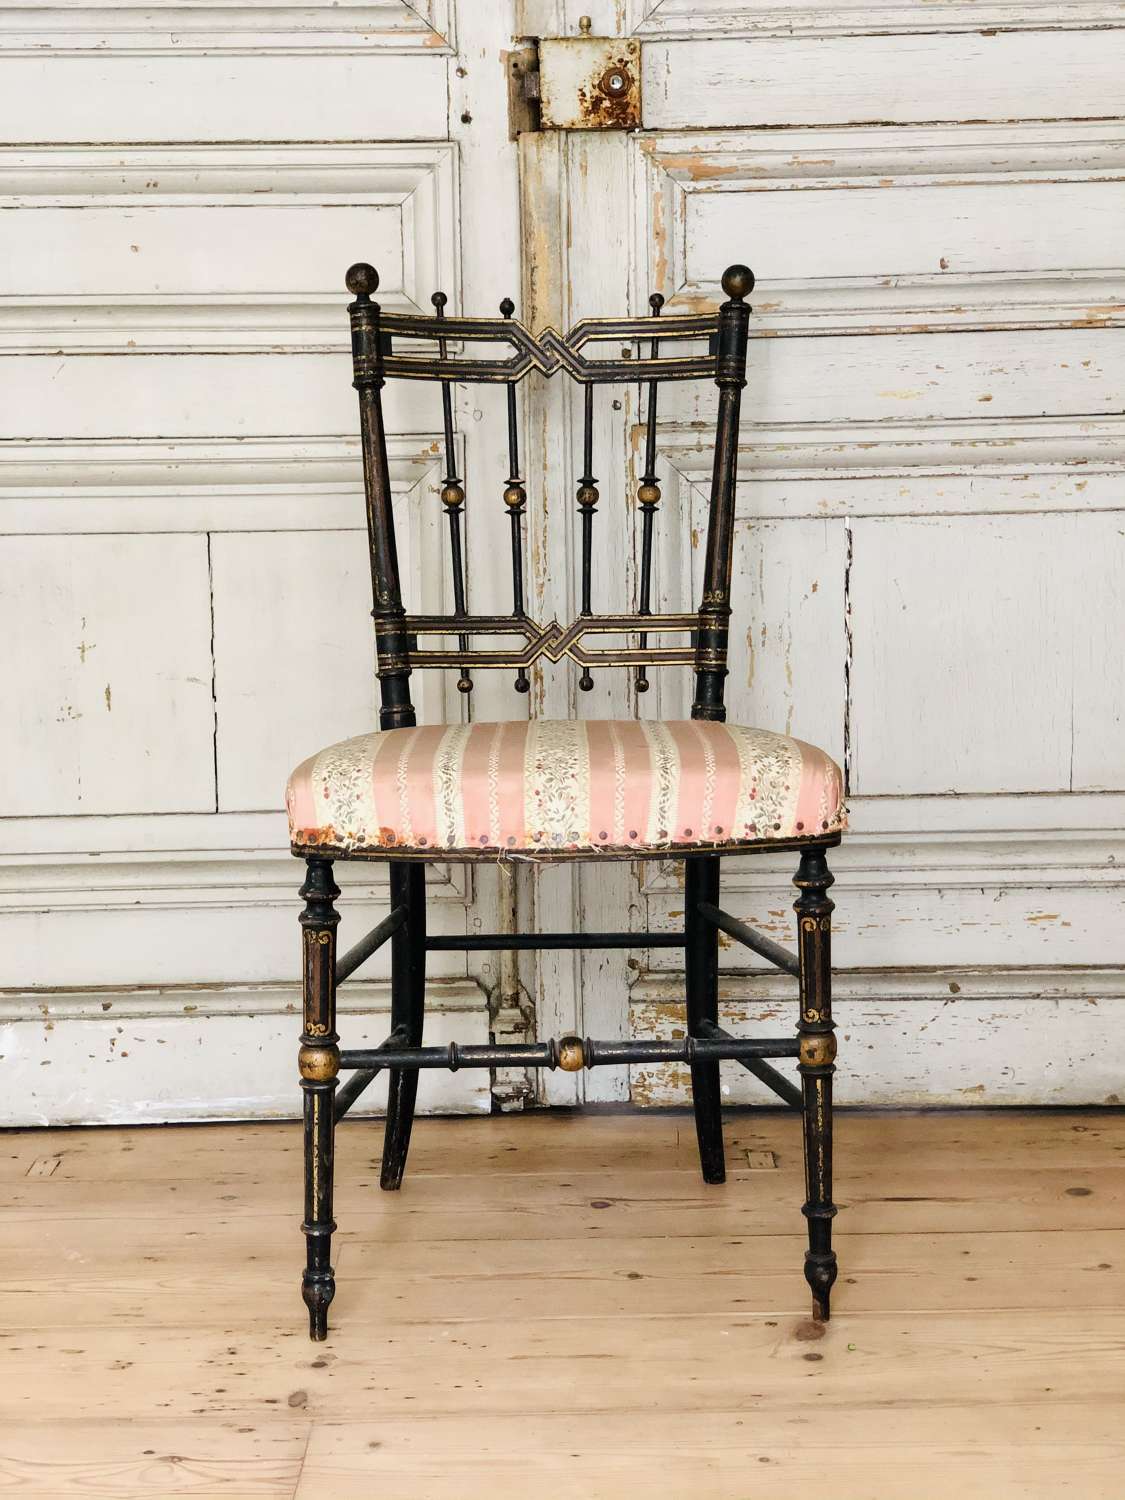 19th century French chair - original paint